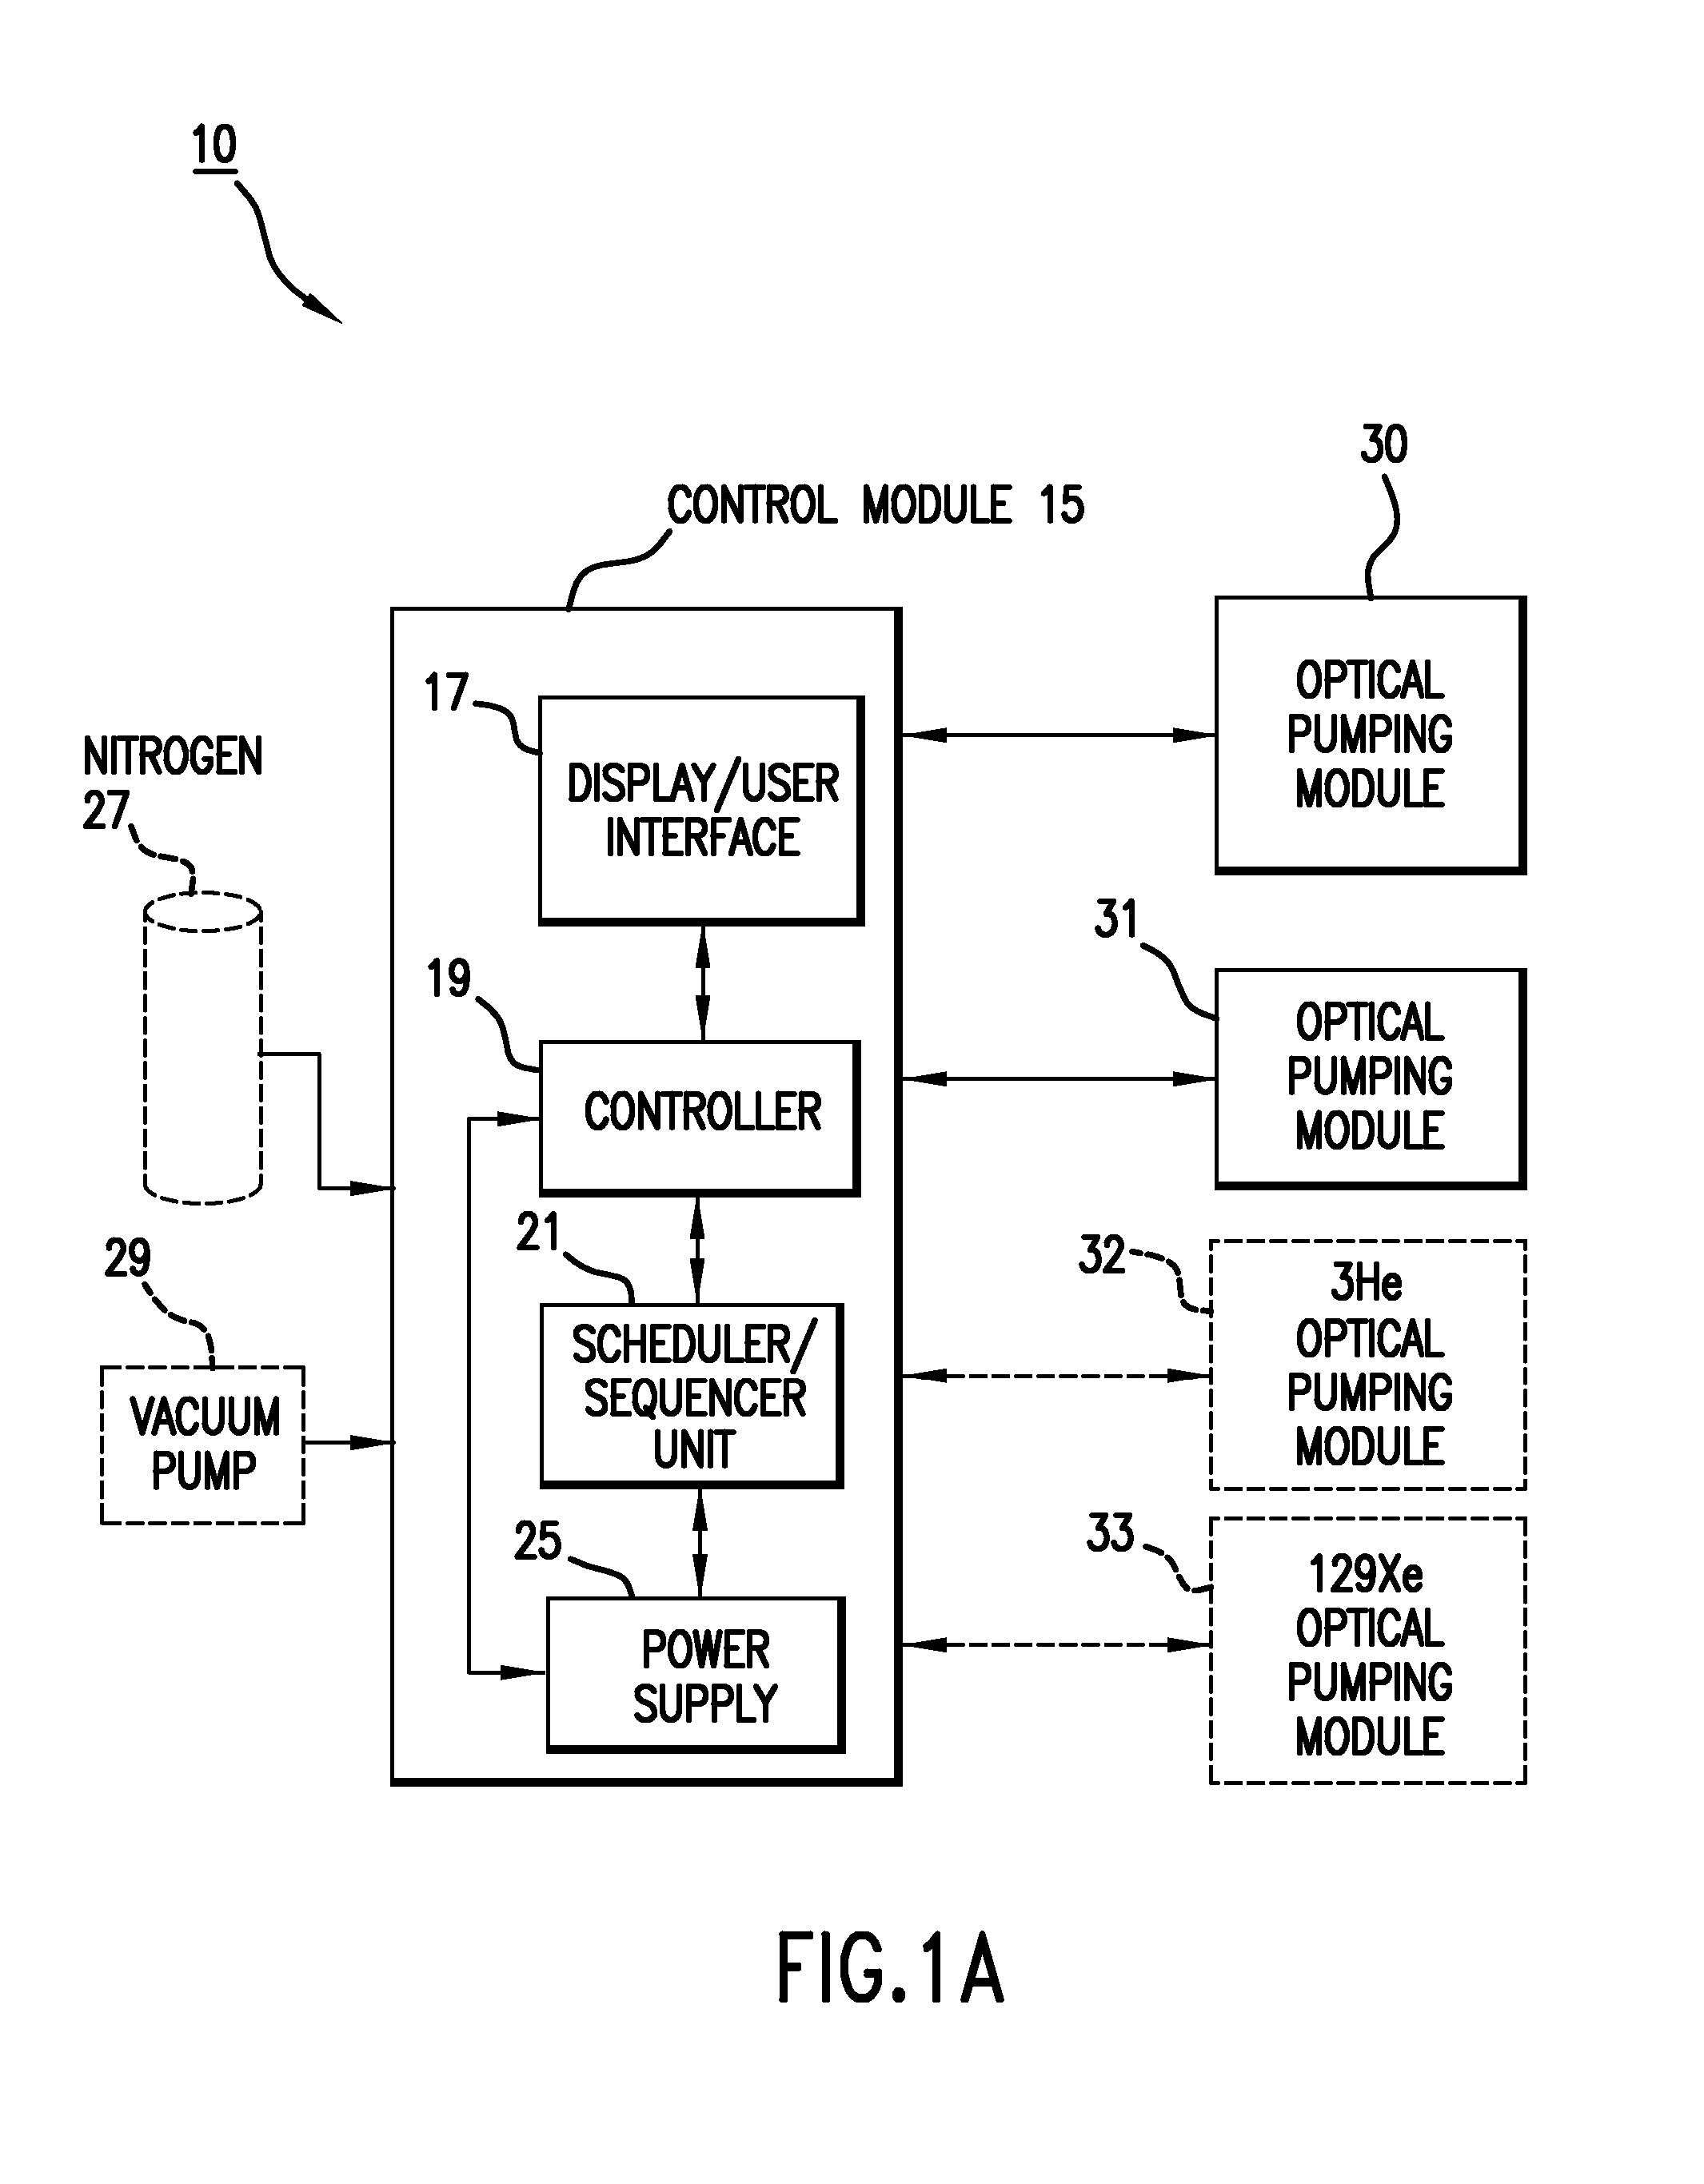 Optical Pumping Modules, Polarized Gas Blending and Dispensing Systems, and Automated Polarized Gas Distribution Systems and Related Devices and Methods